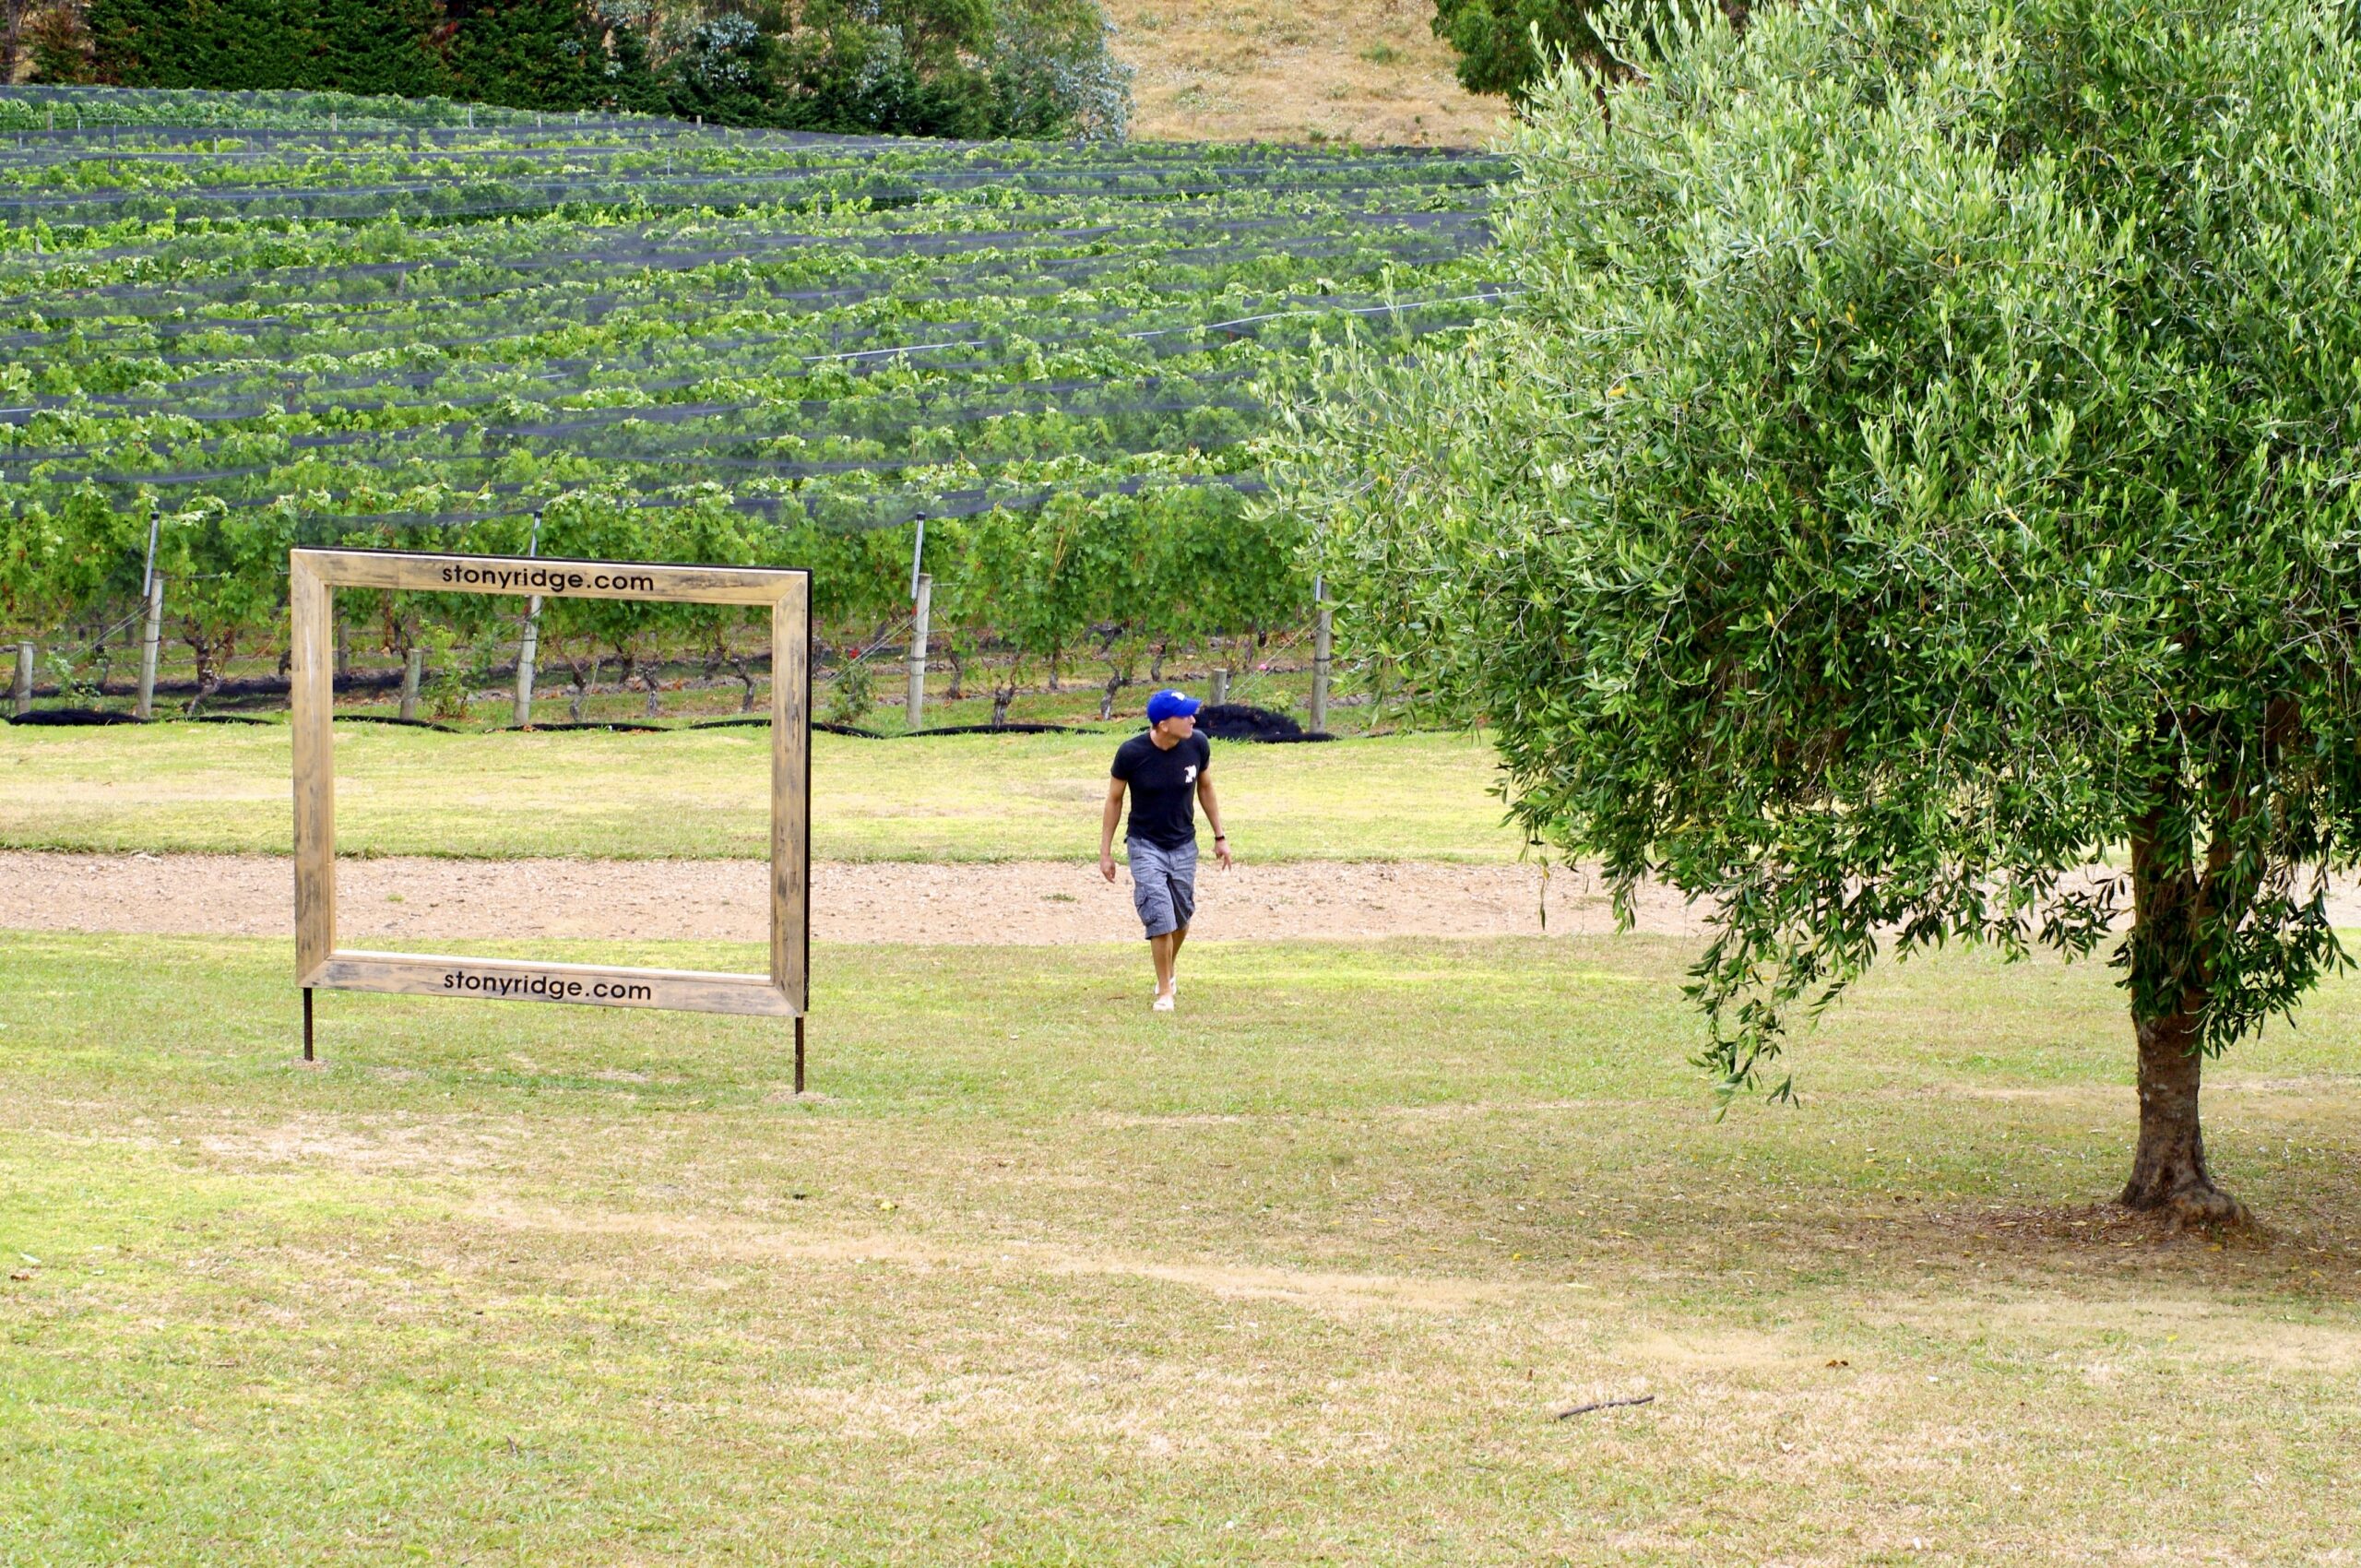 A person wearing a blue hat and black shirt walks across a grassy field towards a vineyard in the background. In the foreground, there is a large wooden picture frame with a website written on it. A tree is on the right side of the image.